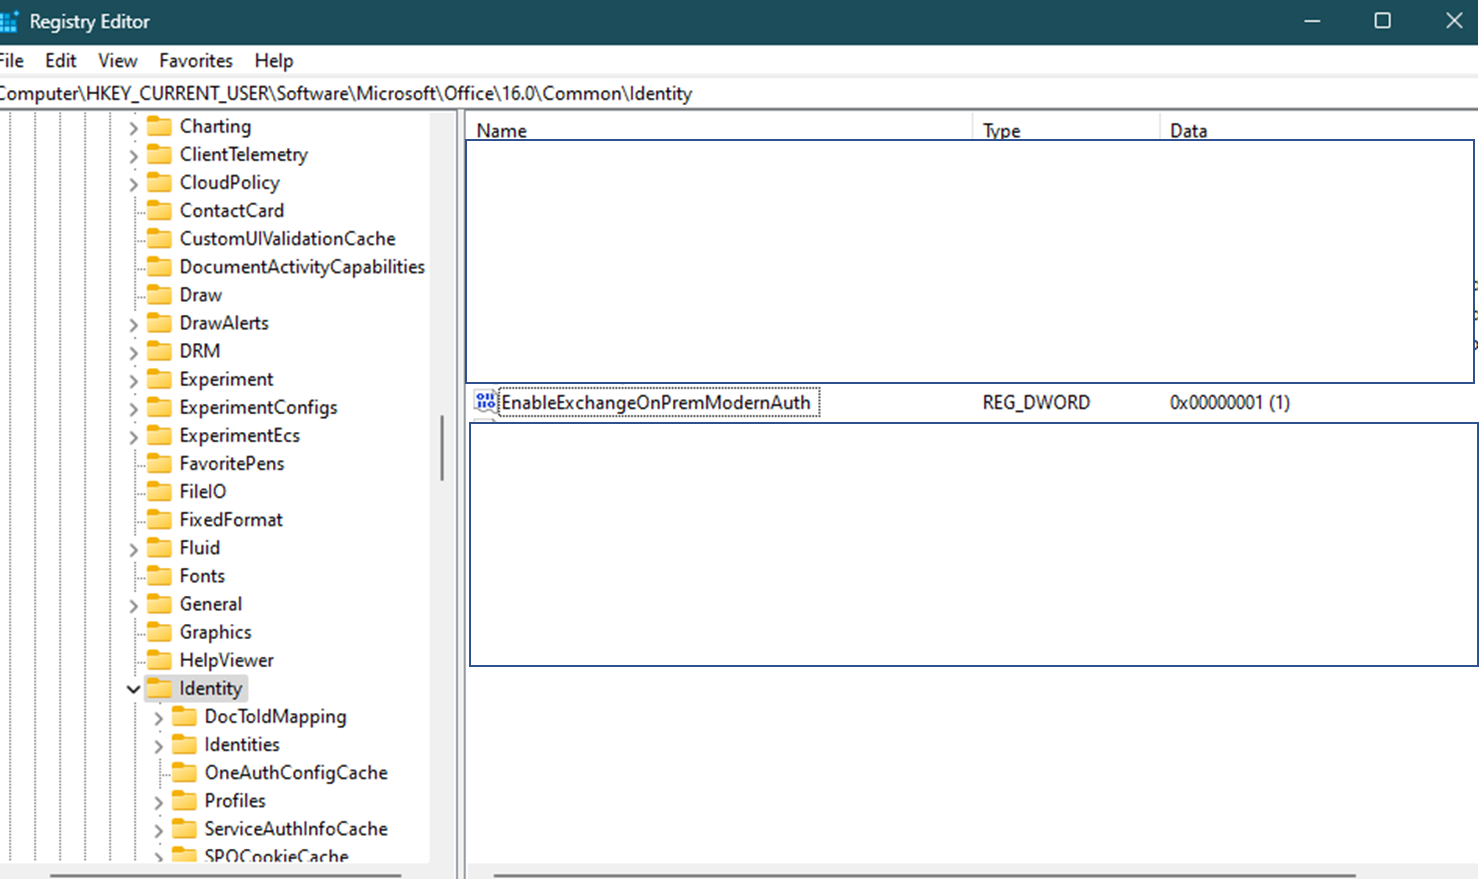 A screenshot that shows the Identity registry key which is located under HKEY_CURRENT_USER\SOFTWARE\Microsoft\Office\16.0\Common.